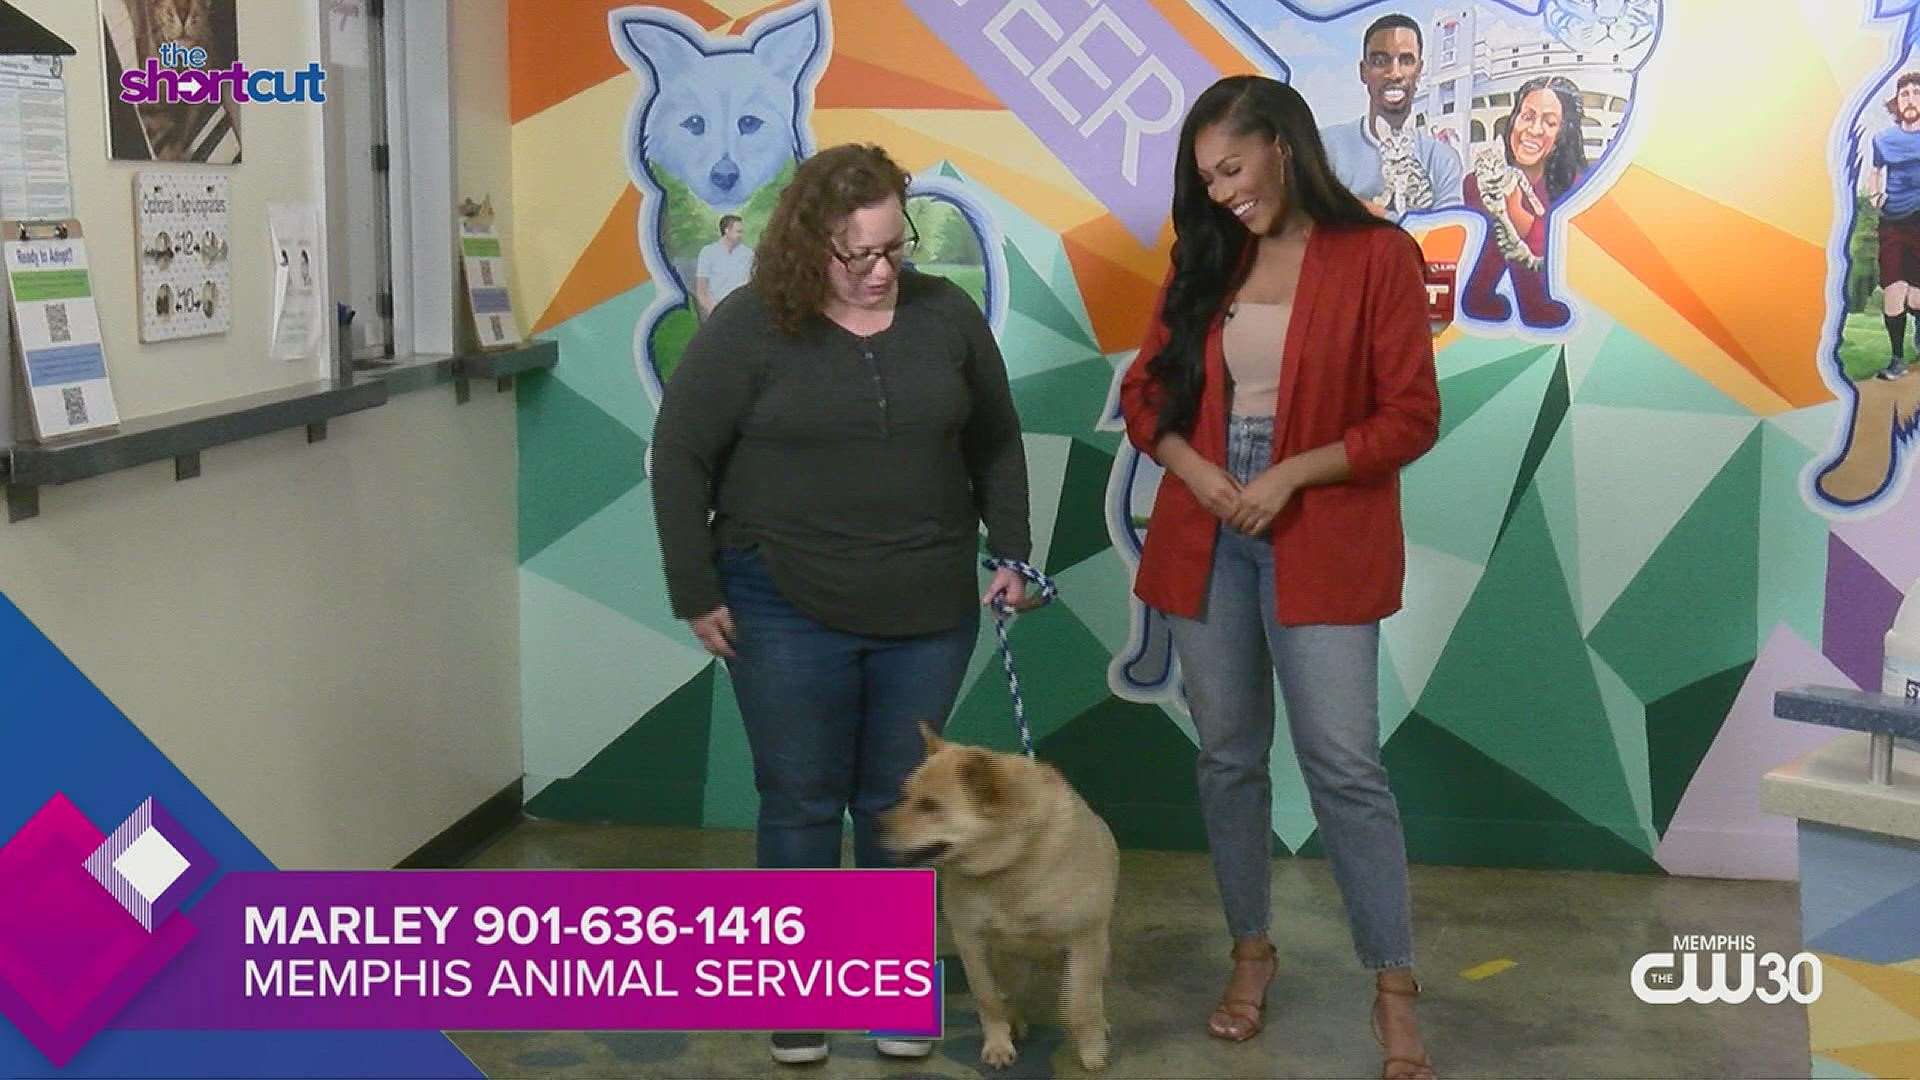 In this week's Pet-of-the-Week, meet Memphis Animal Service's Marley, a lovable office dog. Also, find out how YOU can help animals through more than adoption.